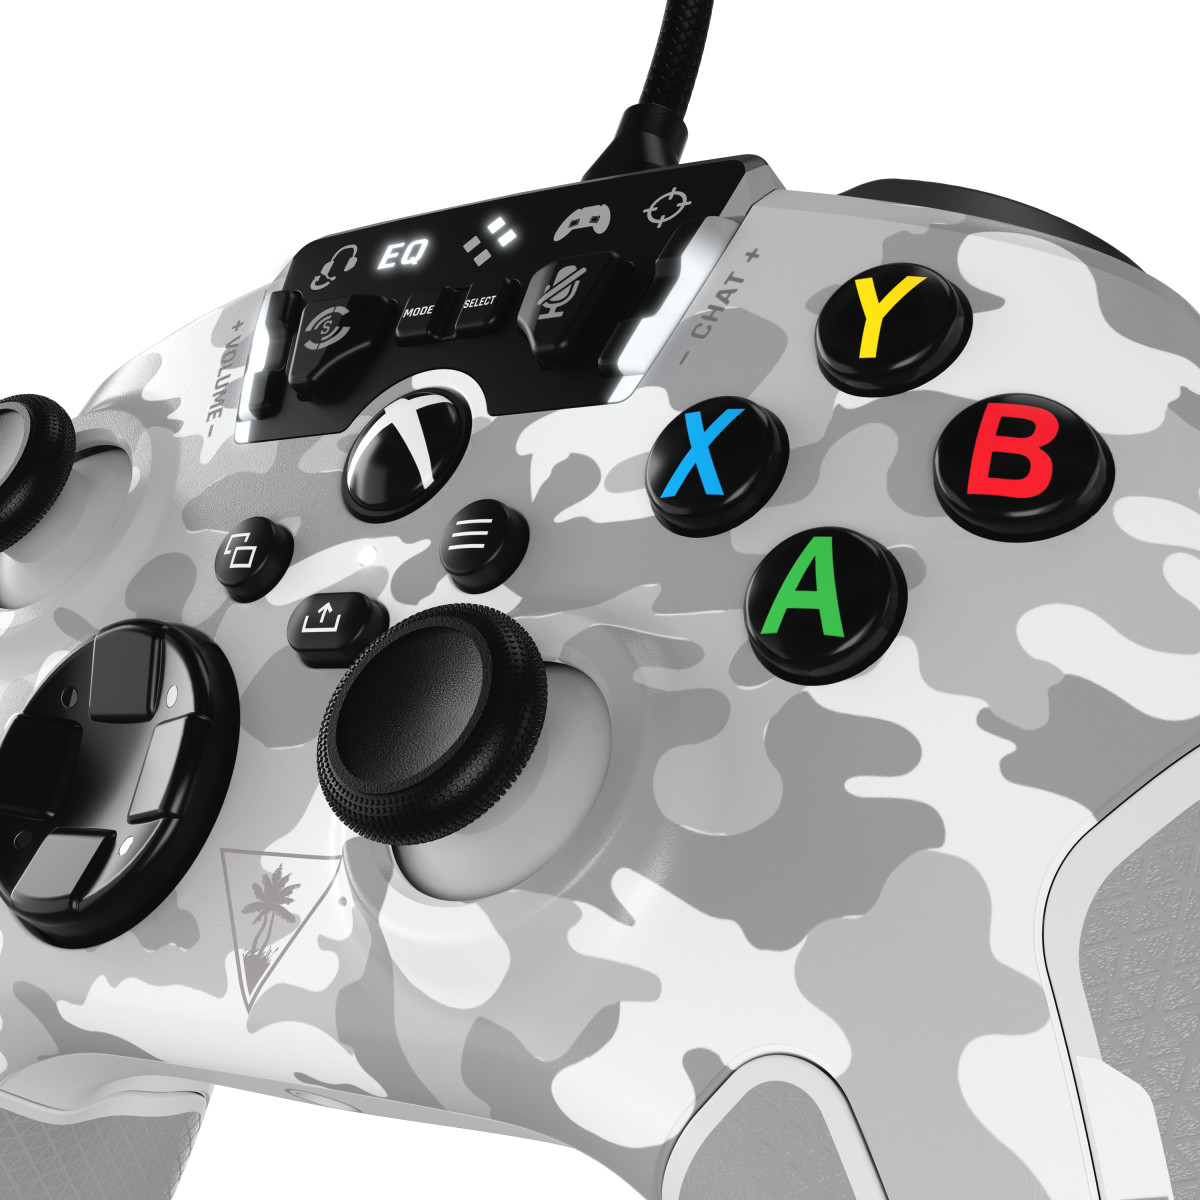 Recon Wired Controller - Arctic Camo